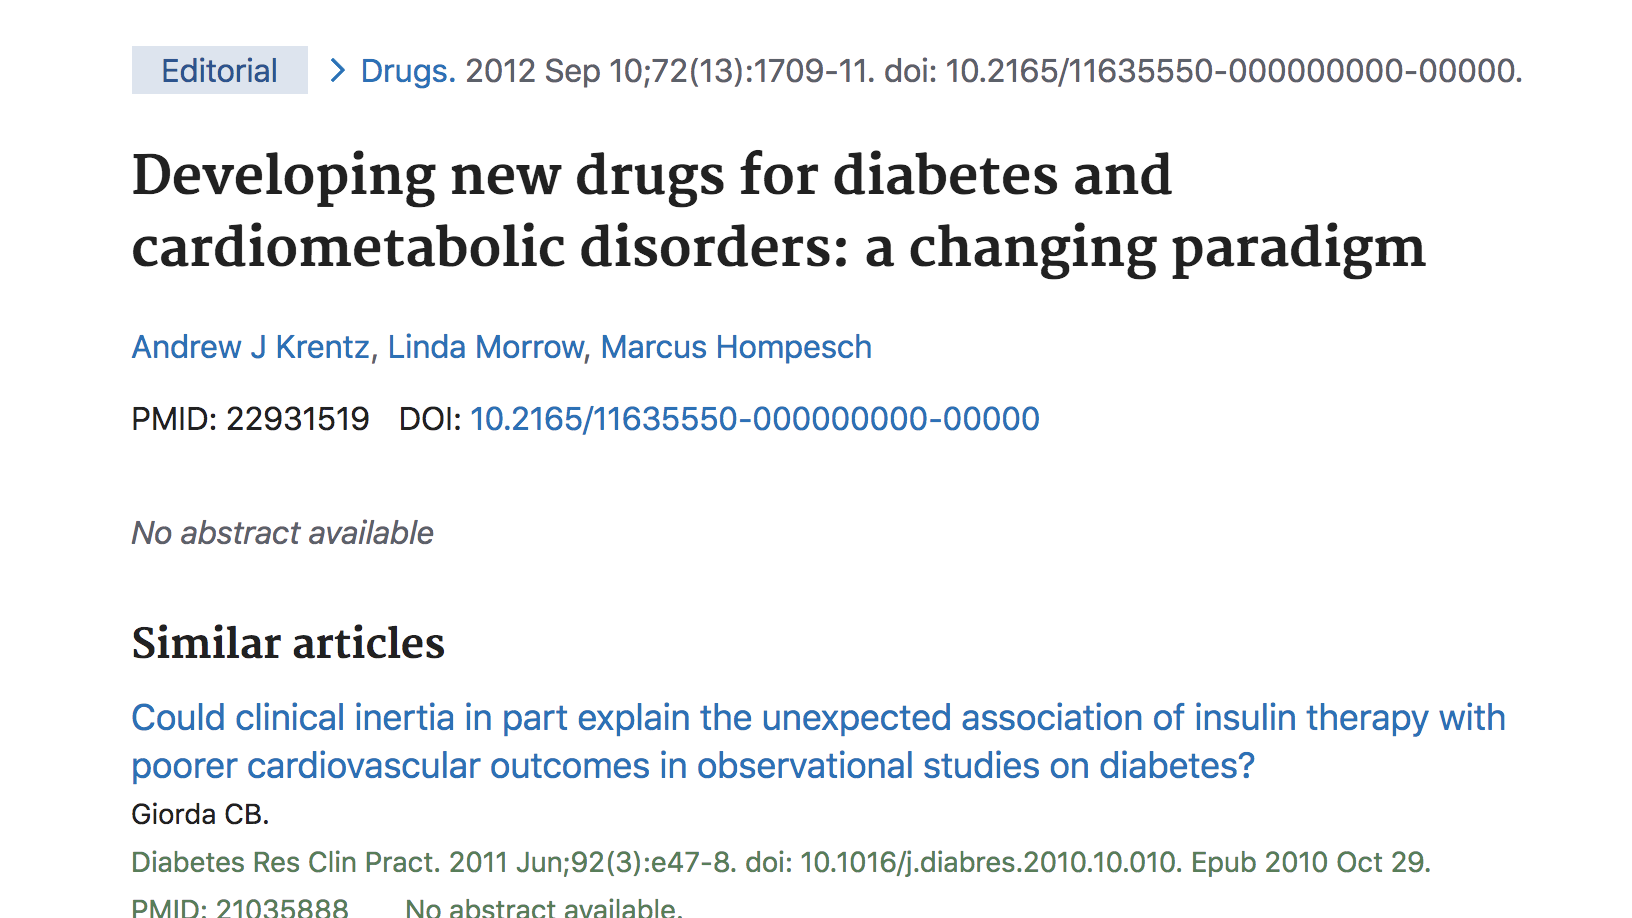 image of Developing new drugs for diabetes and cardiometabolic disorders: a changing paradigm